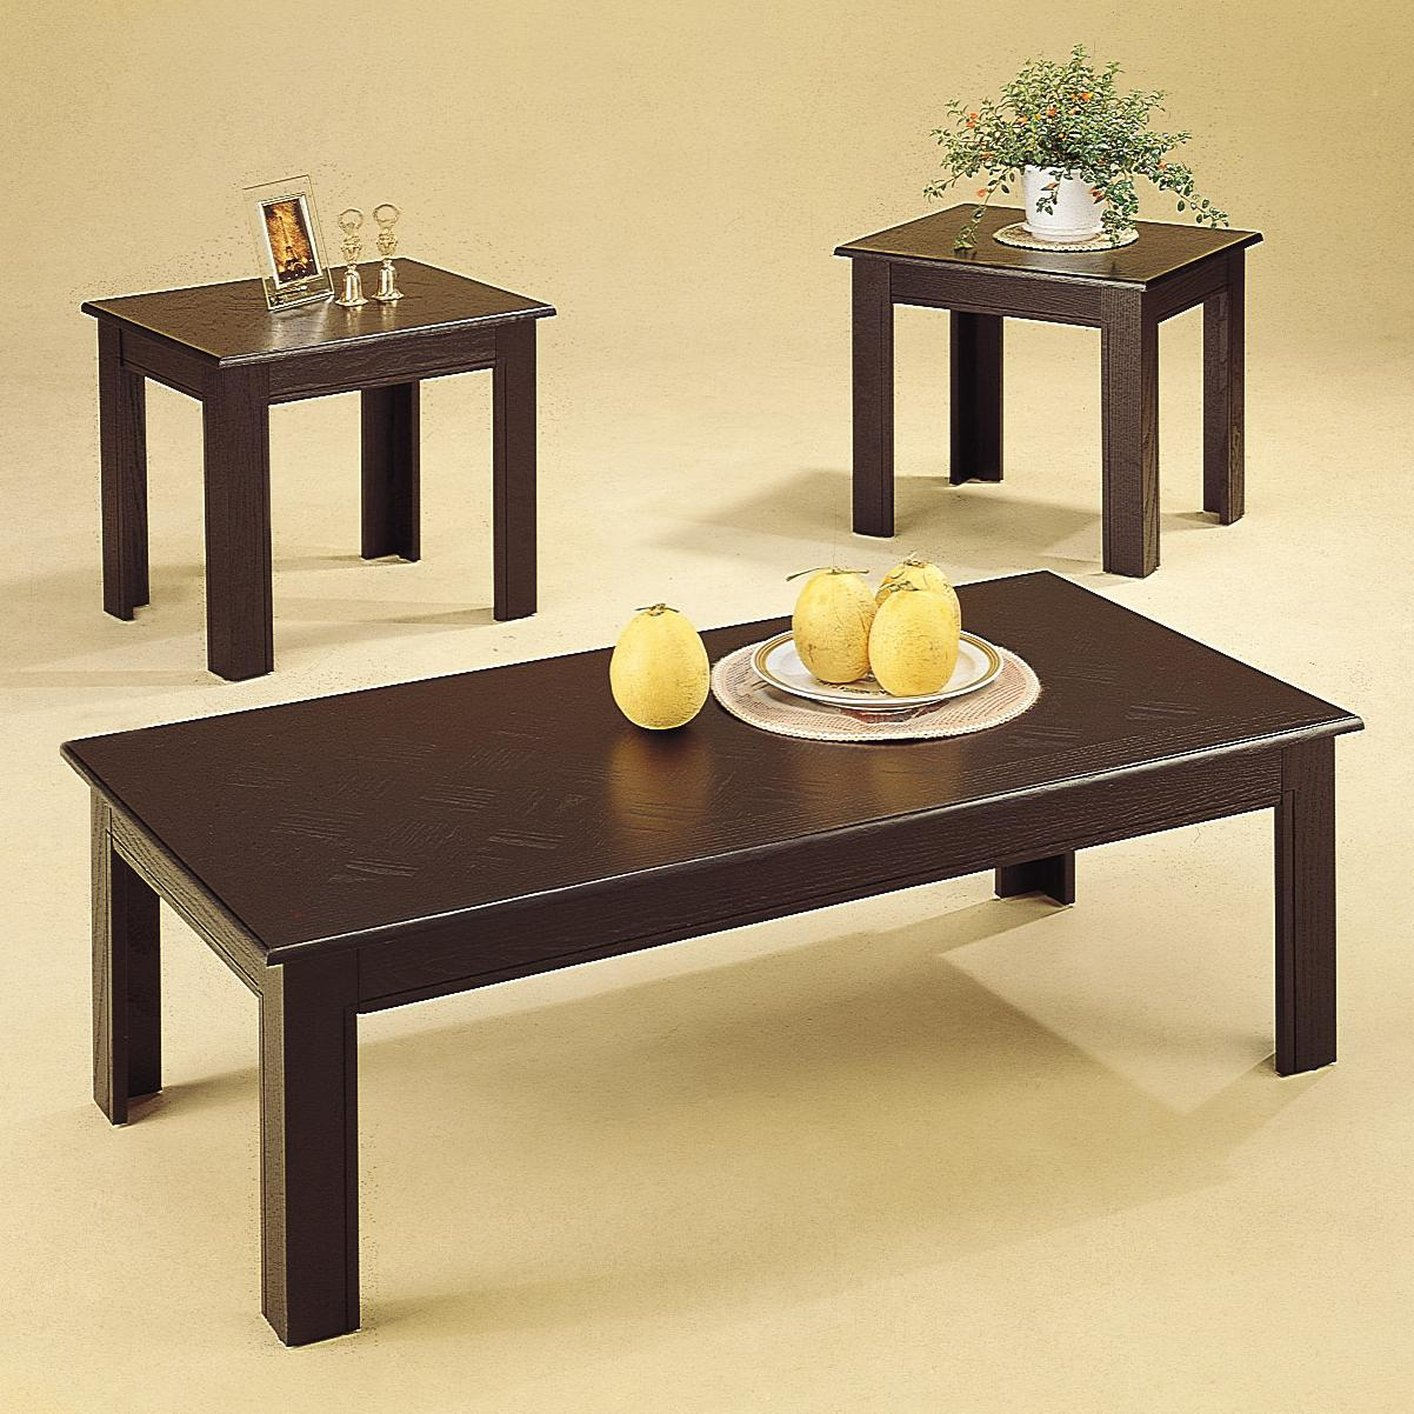 Black Wood Coffee Table Set Steal A Sofa Furniture Outlet Los regarding size 1414 X 1414